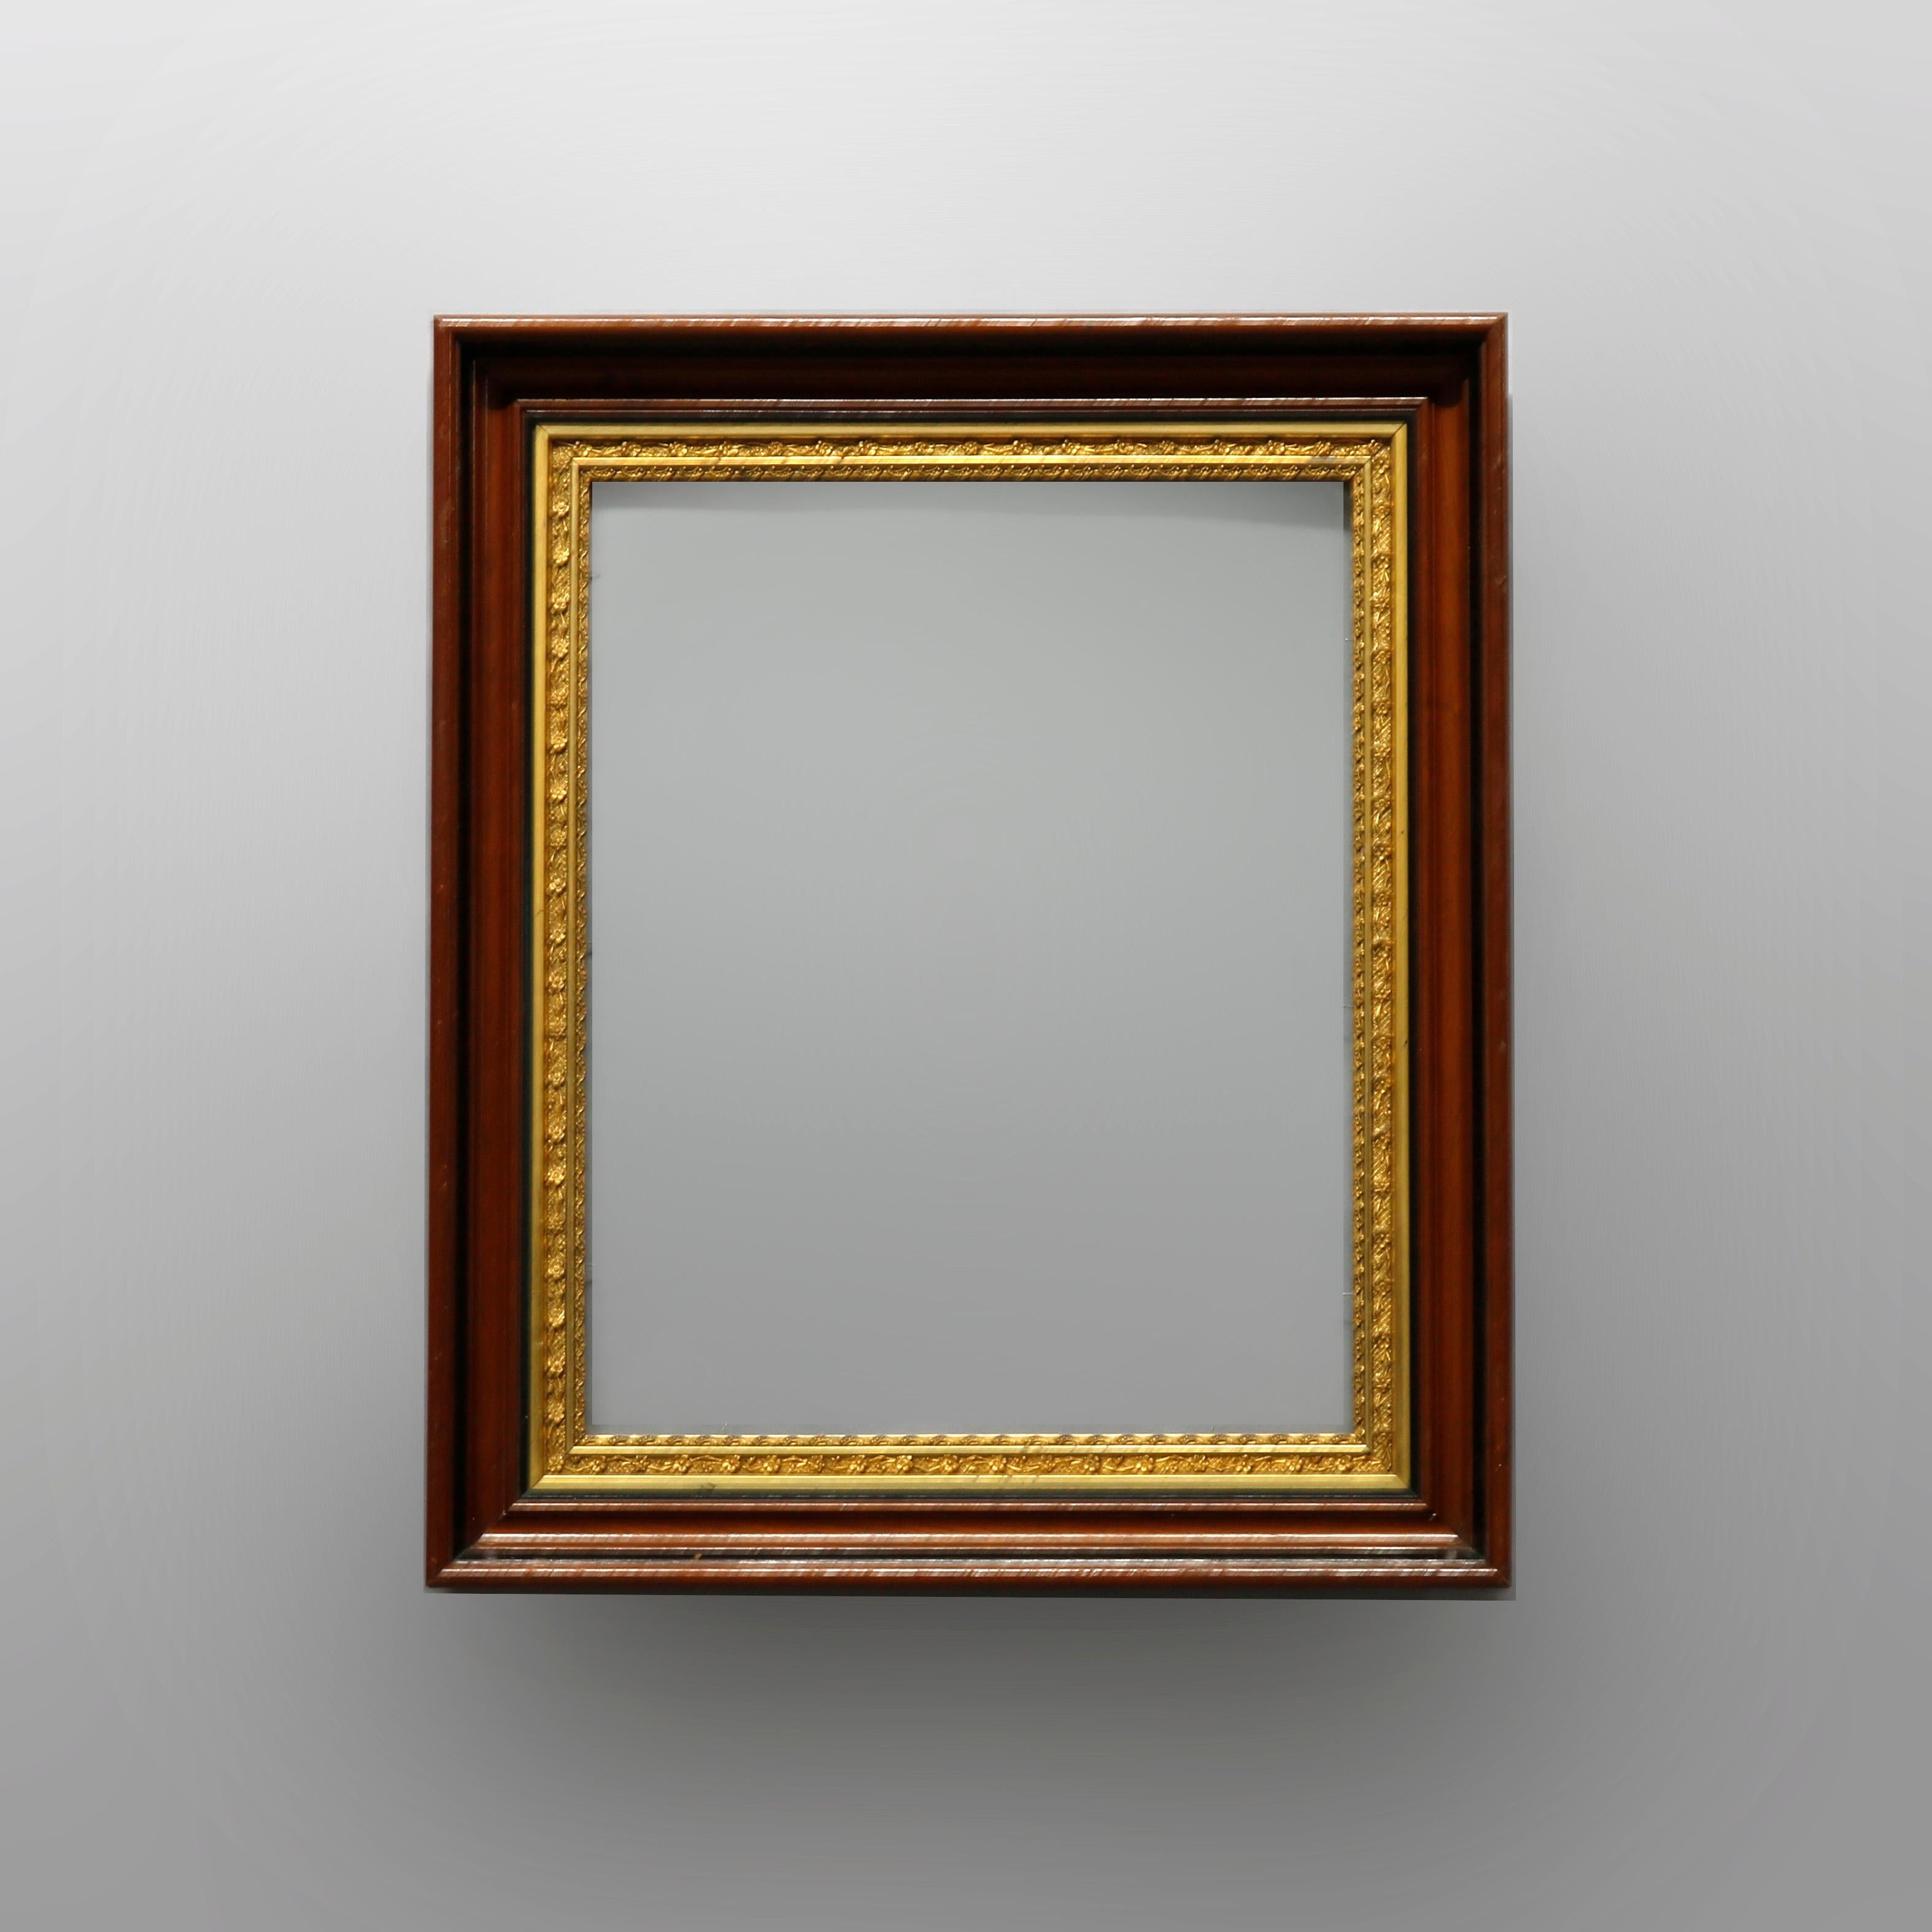 An antique matching pair of art frames offer walnut construction with floral and foliate relief giltwood interior trimming with ebonized banding, c1890

Measures: overall 25.75